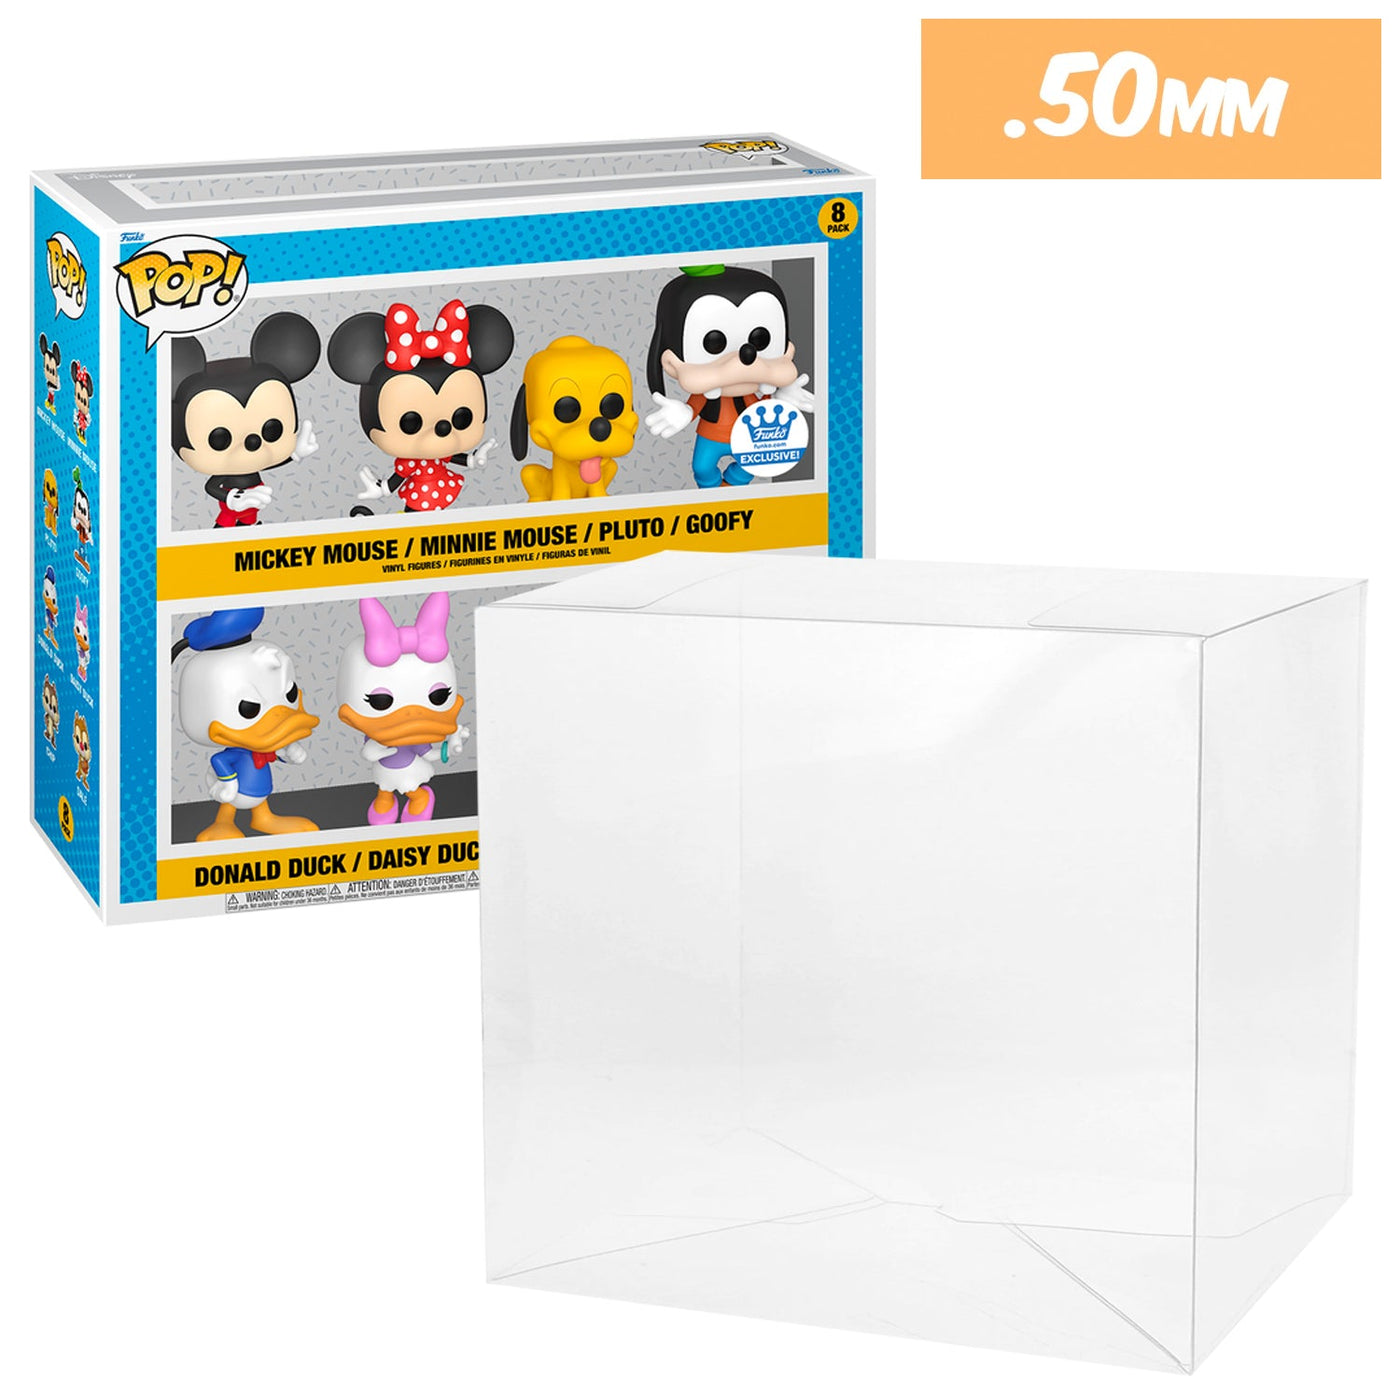 Funko POP! Mickey and Friends - Mickey Mouse, Minnie Mouse, Pluto, Goofy, Donald Duck, Daisy Duck, Chip & Dale 8 Pack Pop Protector Size CONFIRMED!